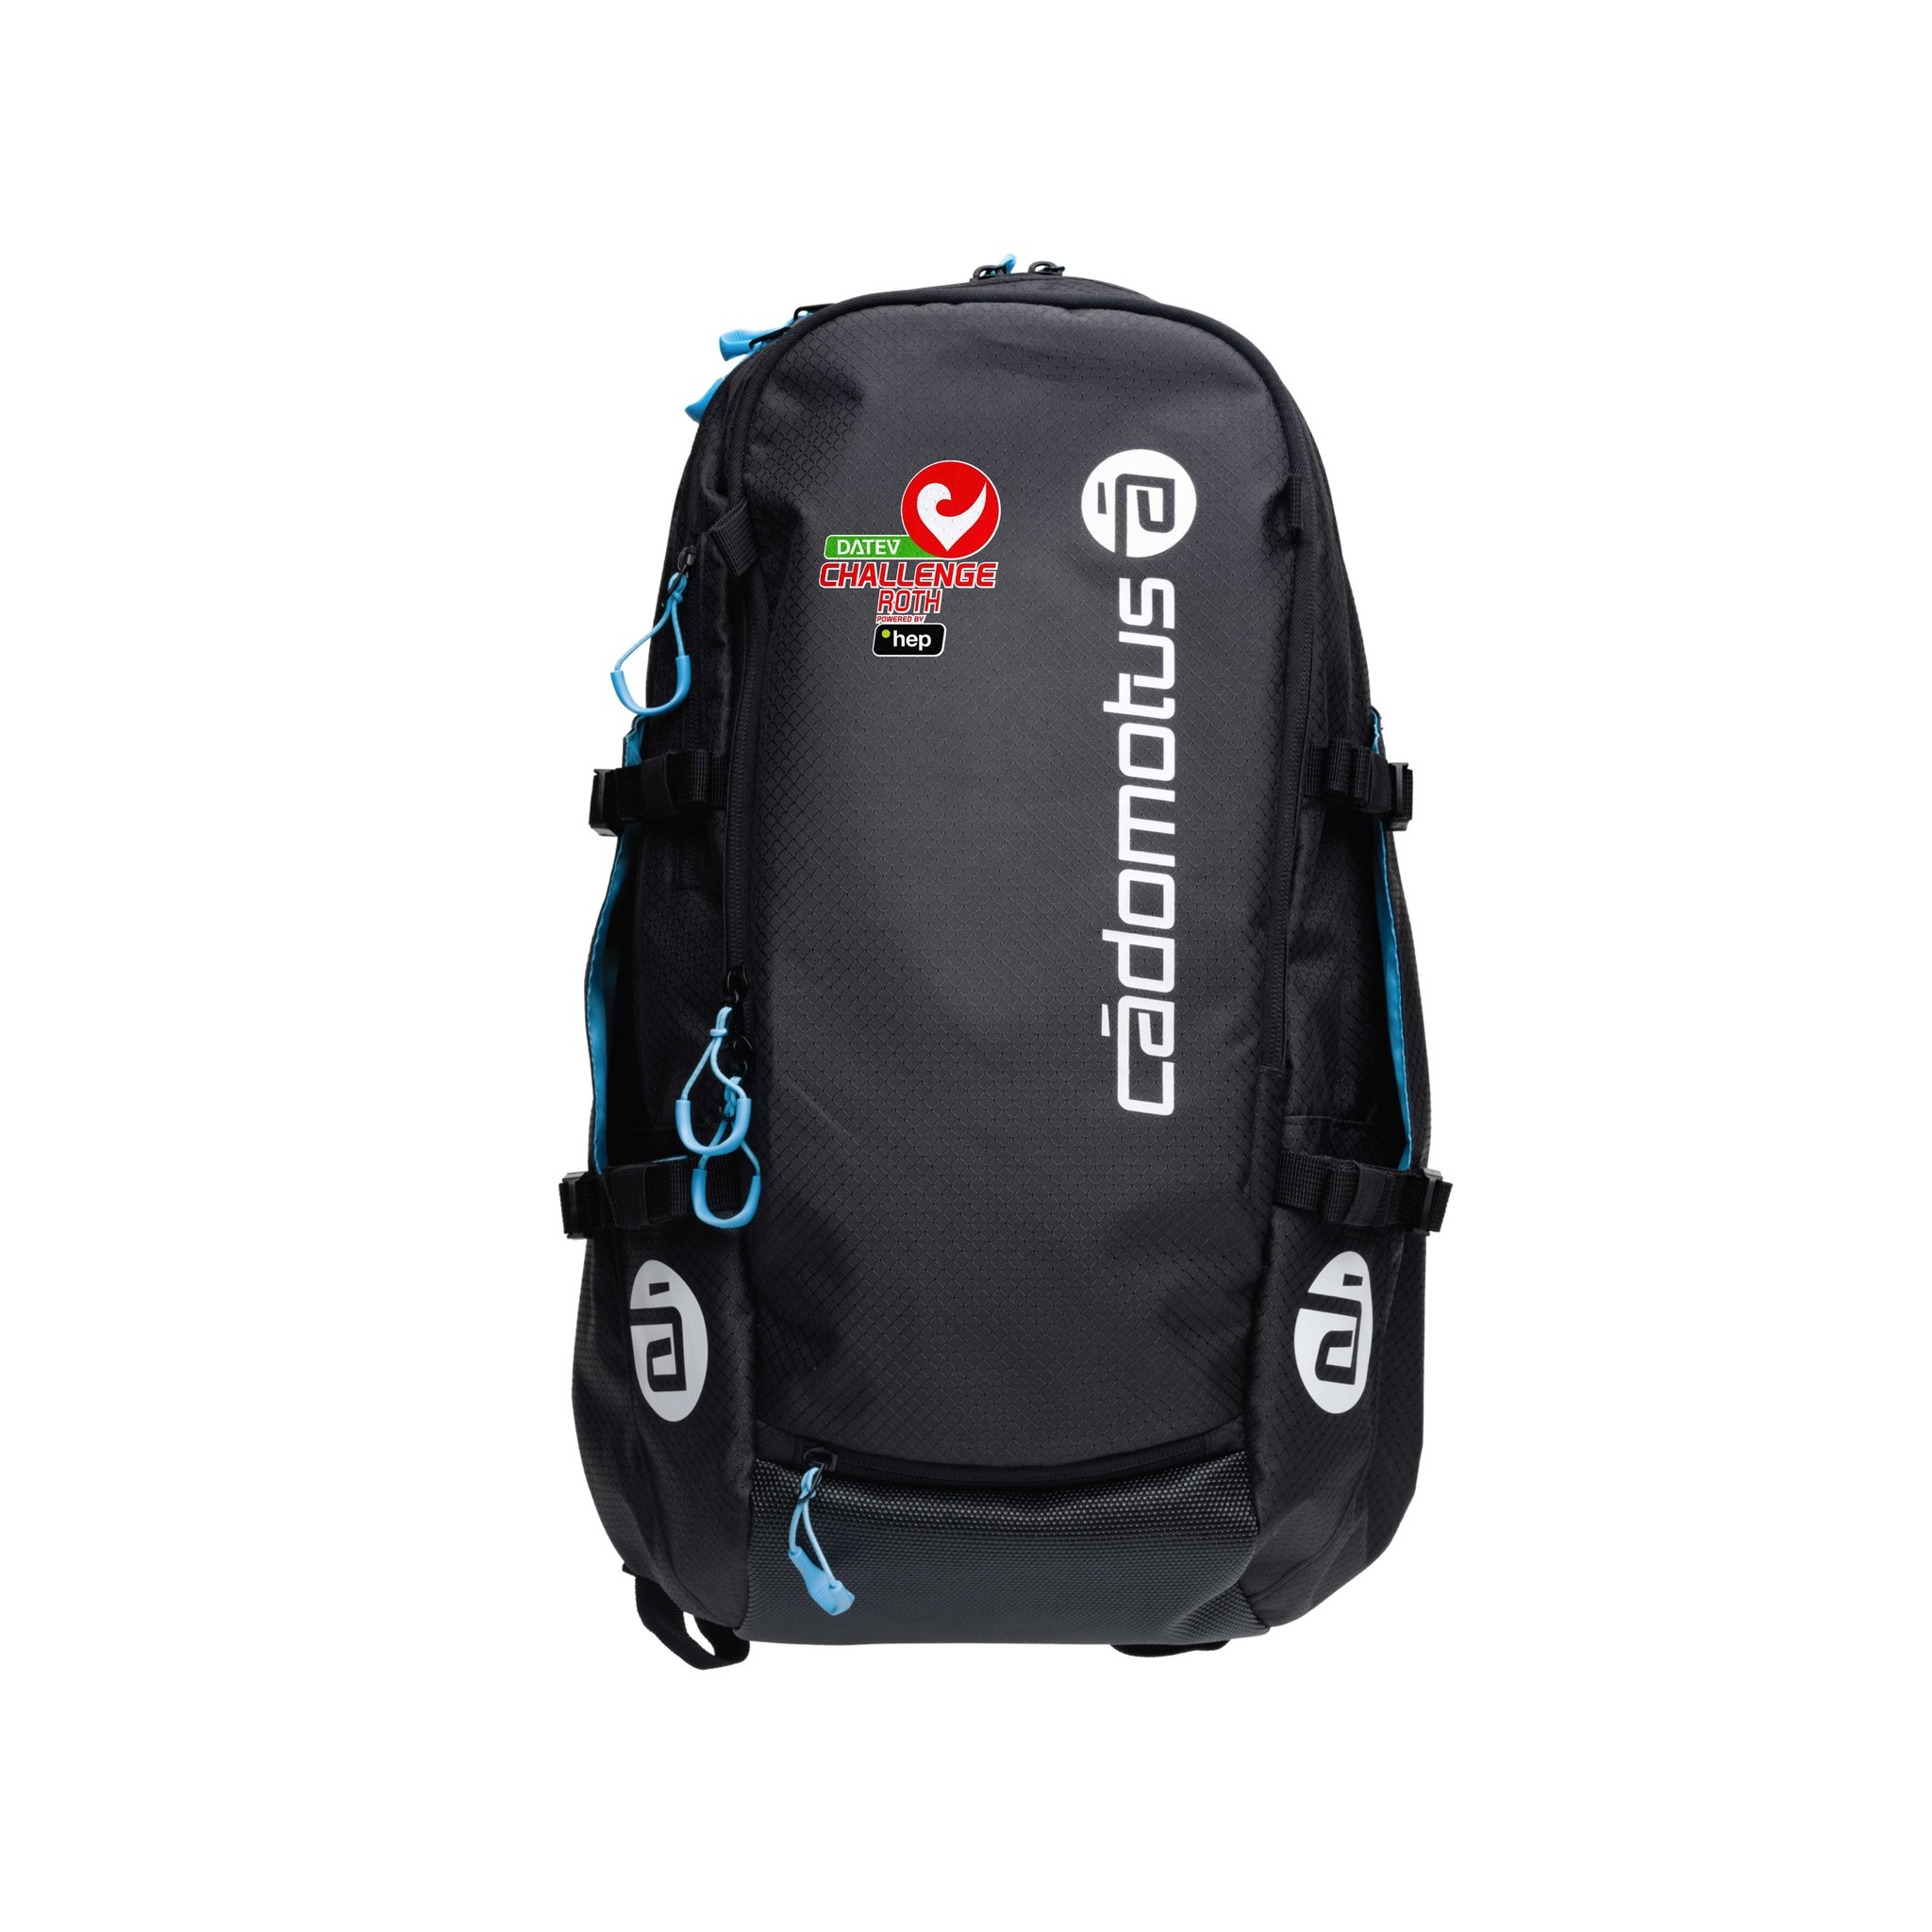 Airflow 2.0 Every Day Training Backpack XL - Challenge Roth Edition